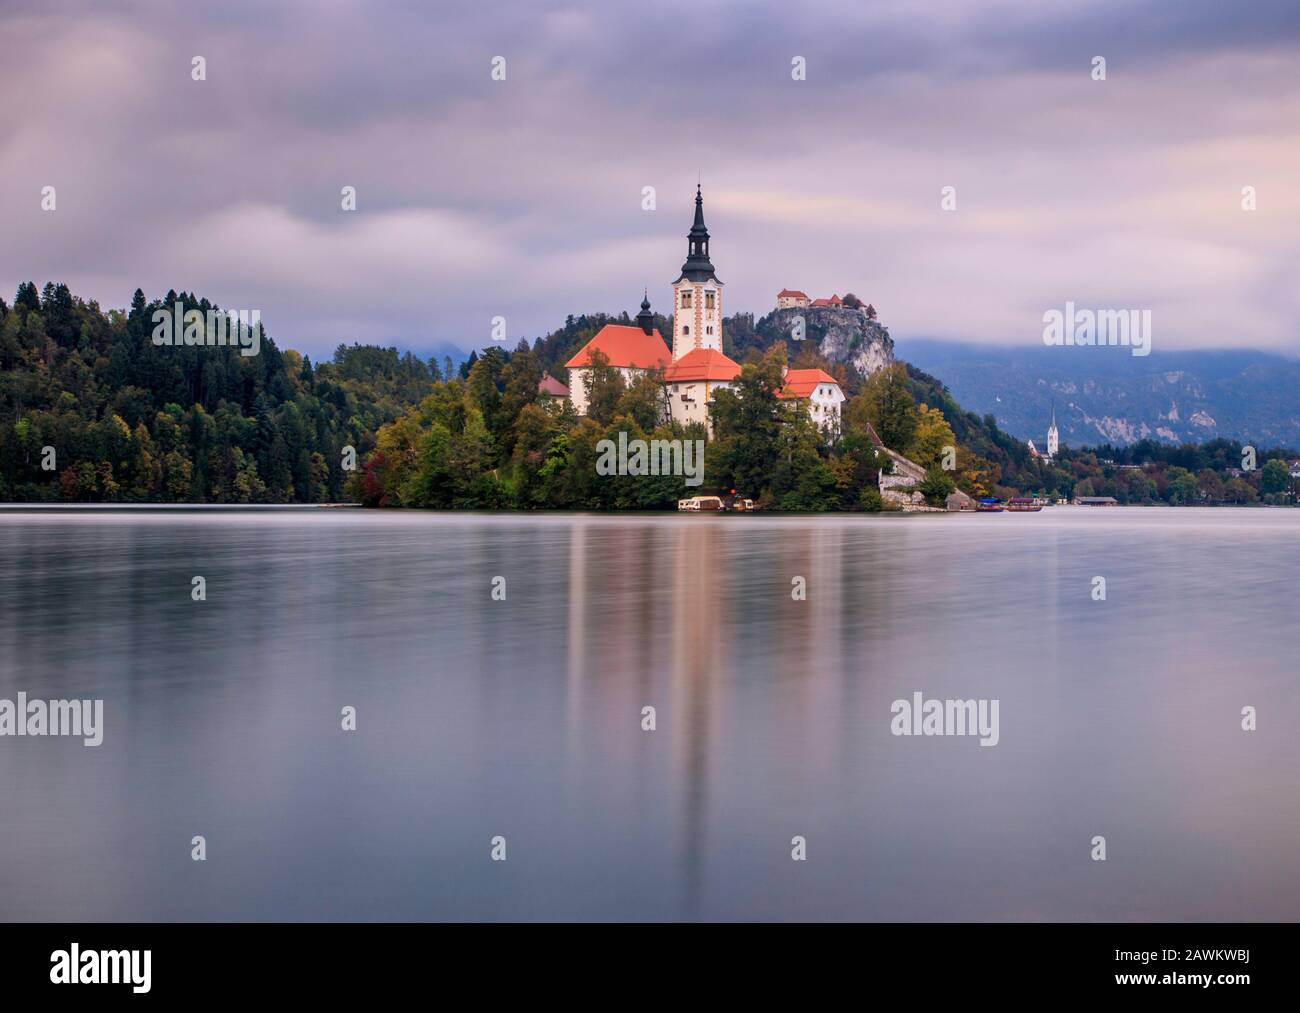 Bled church standing on an island in the middle of the lake. Slovenia Stock Photo